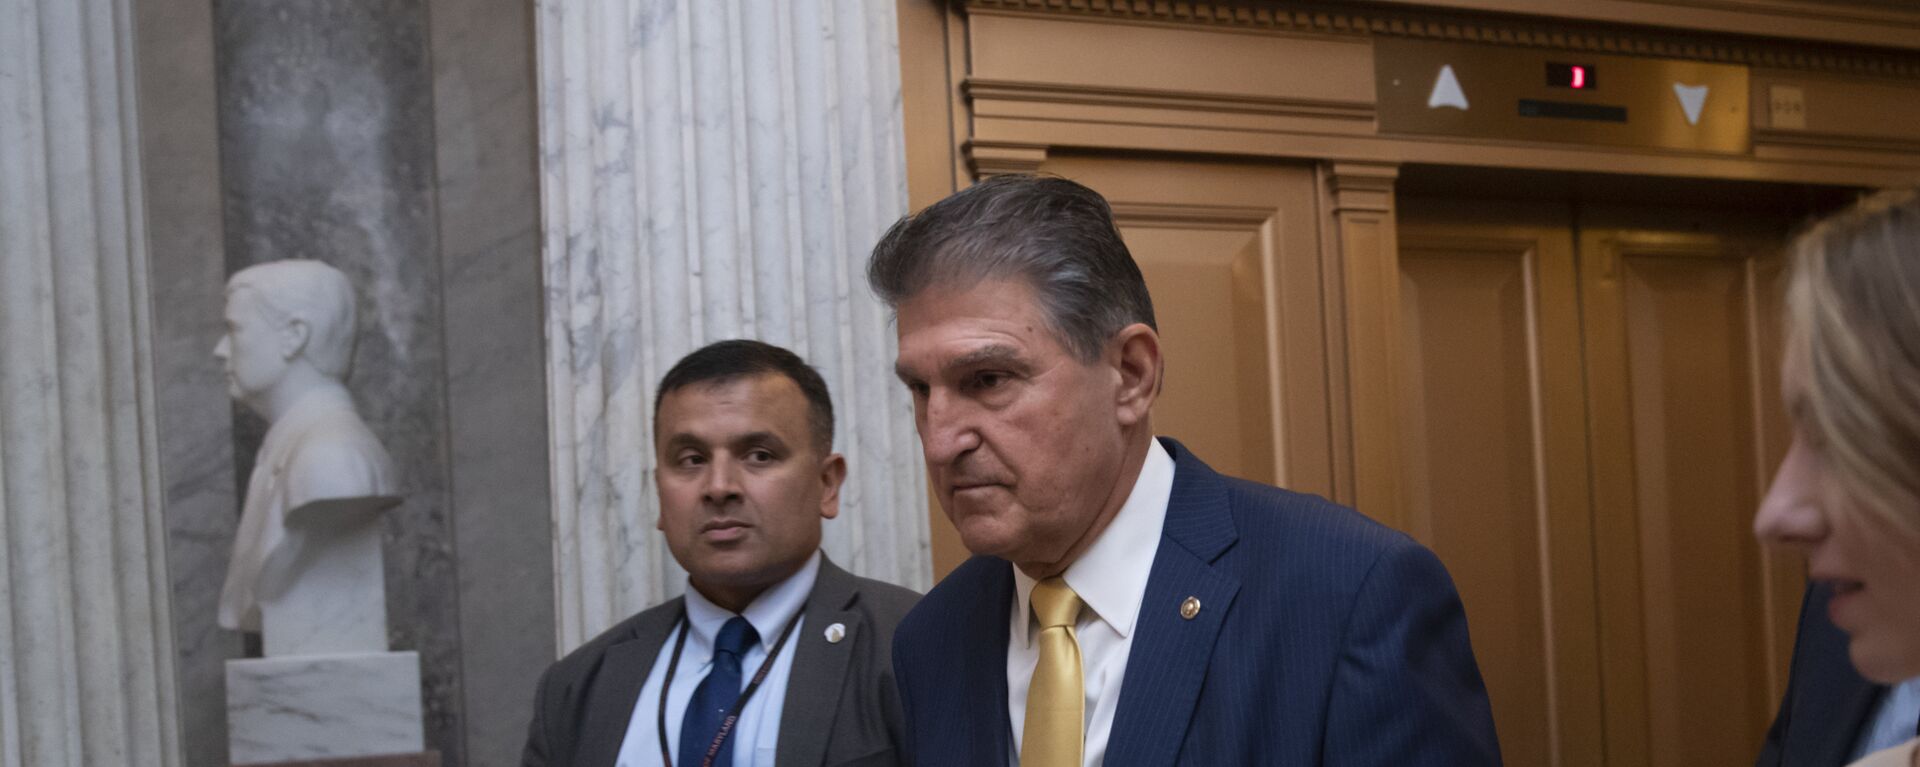 Sen. Joe Manchin, D-W.Va., arrives at the chamber for a procedural vote to advance the confirmation of Supreme Court nominee Brett Kavanaugh, at the Capitol in Washington, Friday, Oct. 5, 2018.  - Sputnik International, 1920, 19.12.2021